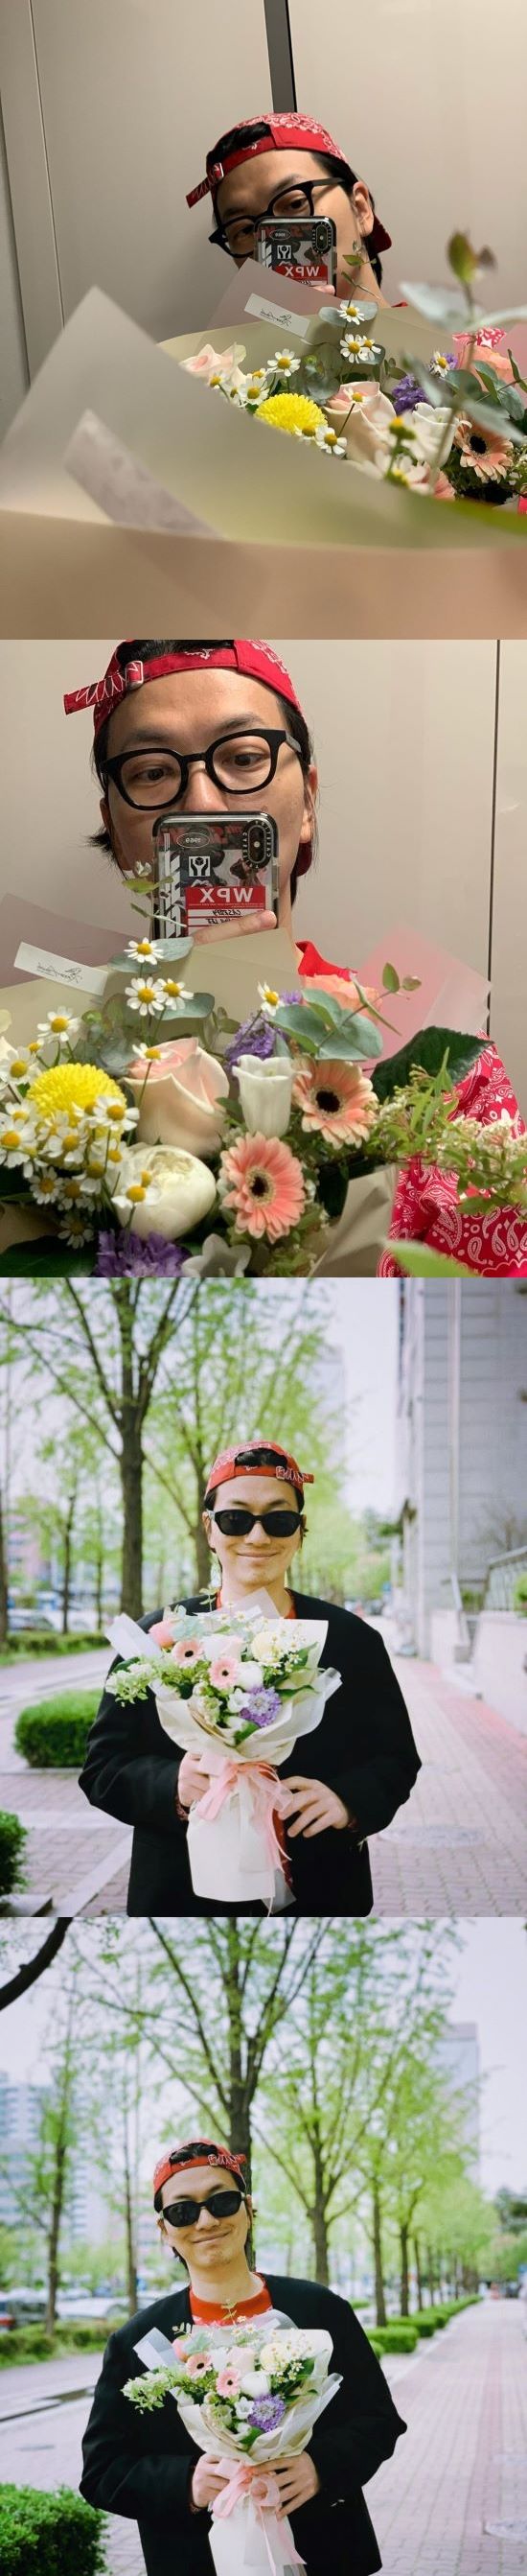 Actor Yi Dong-hwi joins Booke ChallengeOn the 23rd, Yi Dong-hwi said through his Instagram, With the recommendation of a light water, I participated in the #Booke Challenge to give strength to flower farmers. Everybody!Please join me. In the open photo, Yi Dong-hwi is taking a bouquet of flowers and taking a certified shot at home and outdoors, his beautiful heart drawing attention.Yoo Jae-seok has pointed out Lee Kwang-soo as the following runner of the Booke Challenge.Lee Kwang-soo participated in the Booke Challenge and named Actor Yi Dong-hwi and Park Jung-min as the following runners.Yi Dong-hwi stars in the movie Call, which is scheduled for release this year.Photo: Yi Dong-hwi Instagram